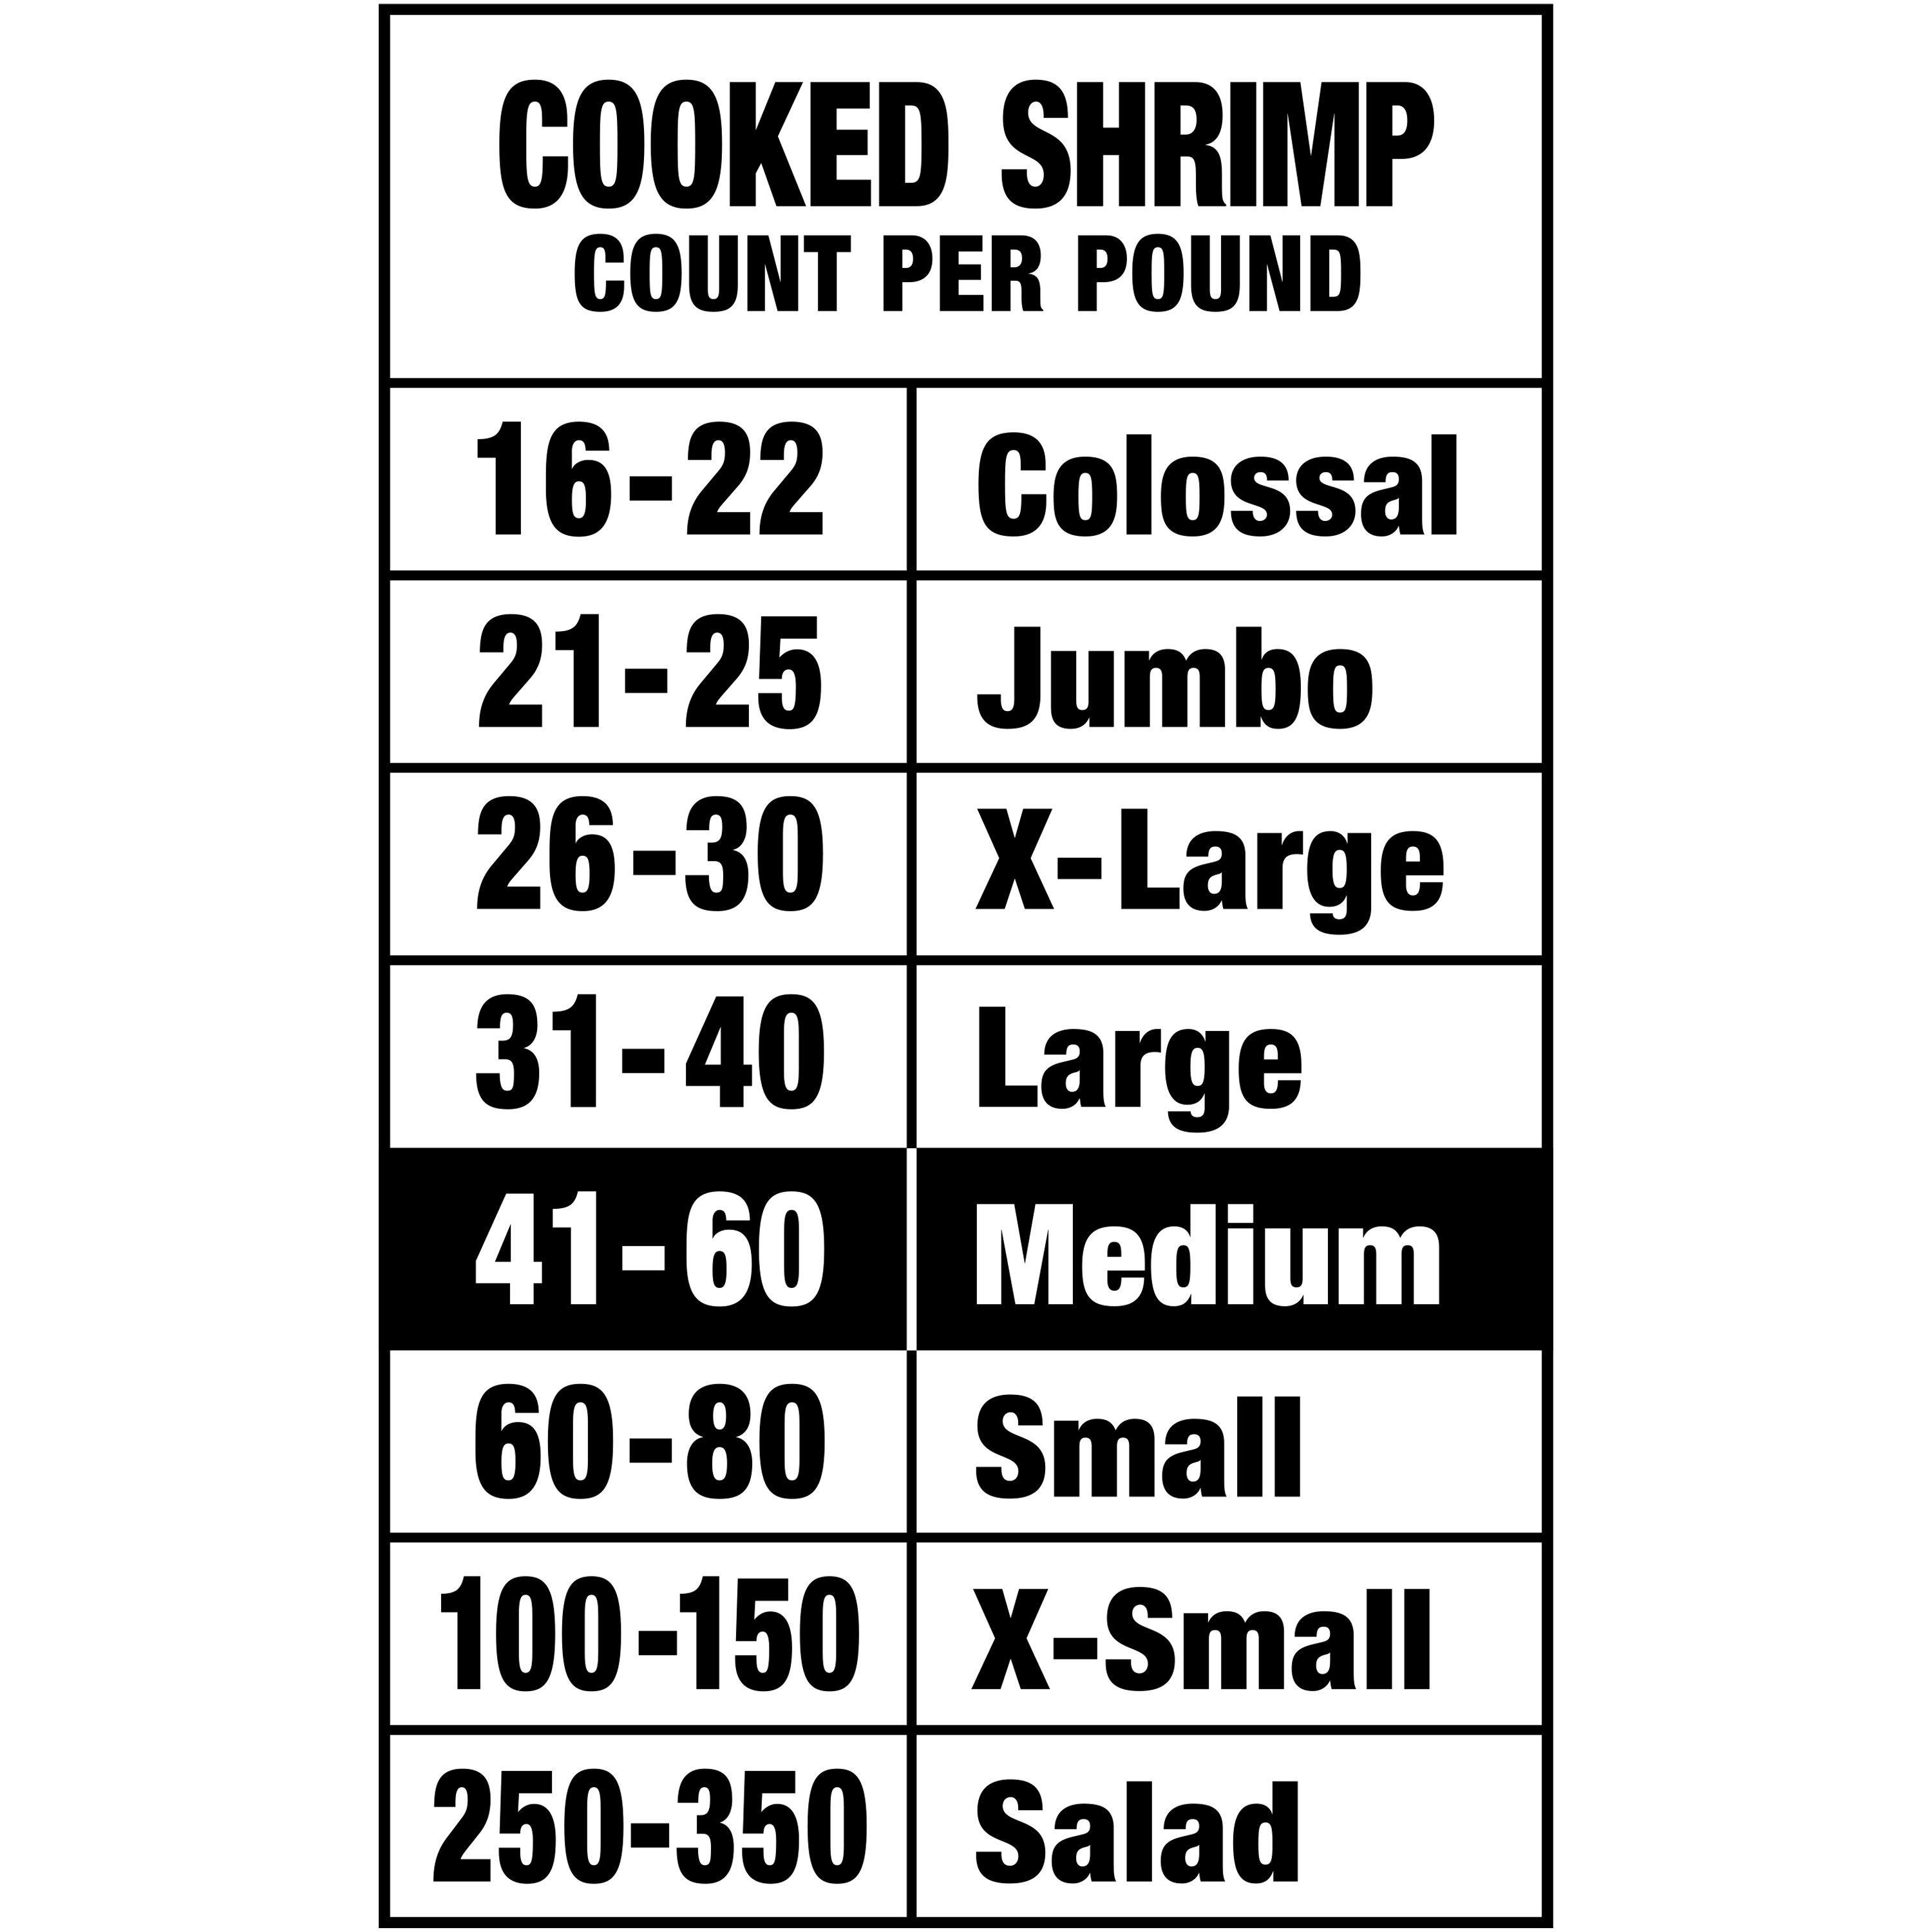 Great Value Frozen Cooked Medium Peeled Deveined Tail-On Shrimp, 24 oz Bag (41-60 count per lb) - image 6 of 10